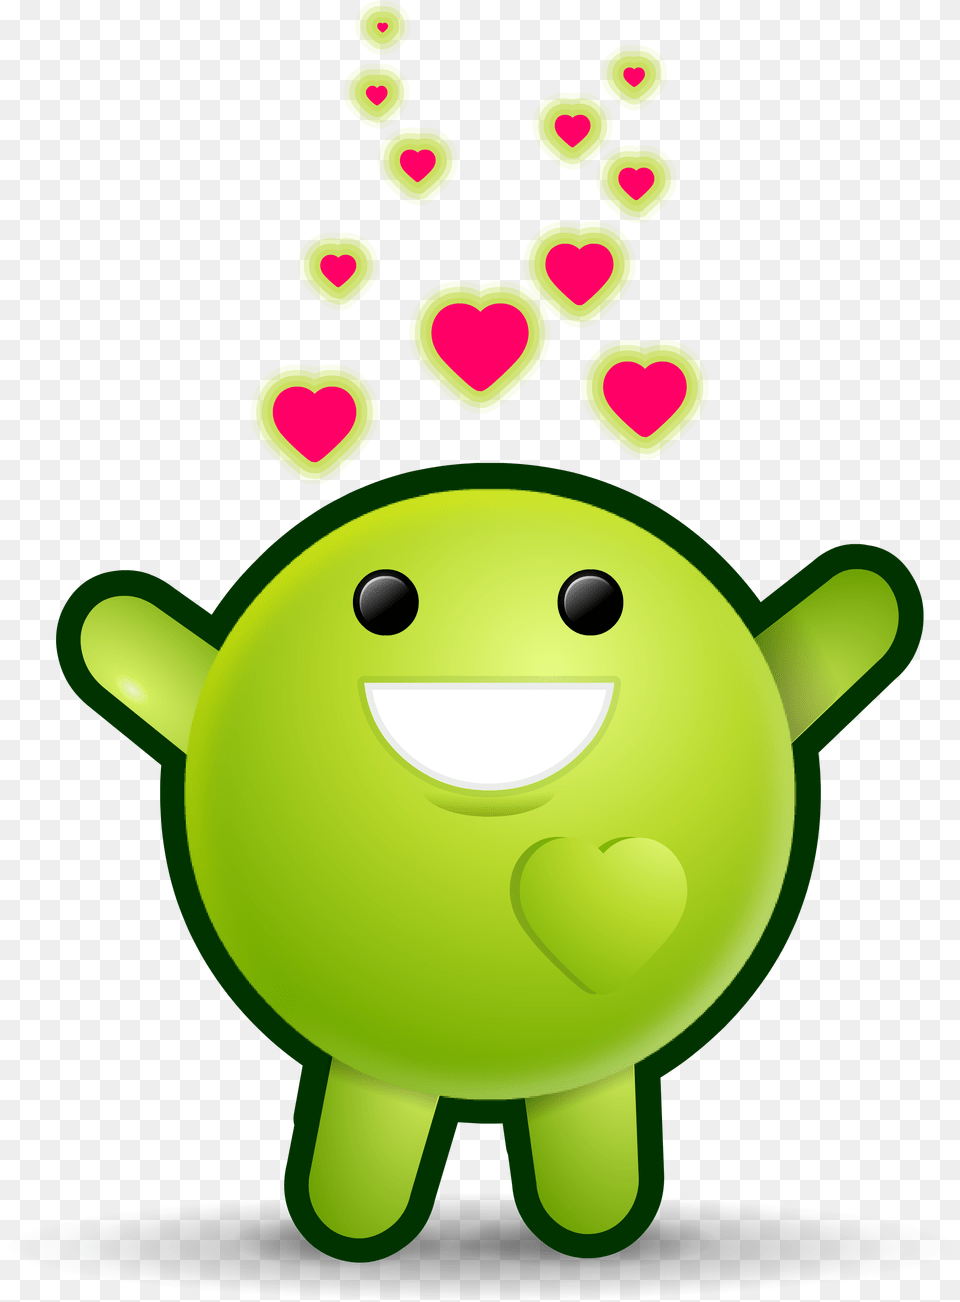 I Came Here With Significant Migraines After Gps Pea Love, Green, Art, Graphics, Nature Png